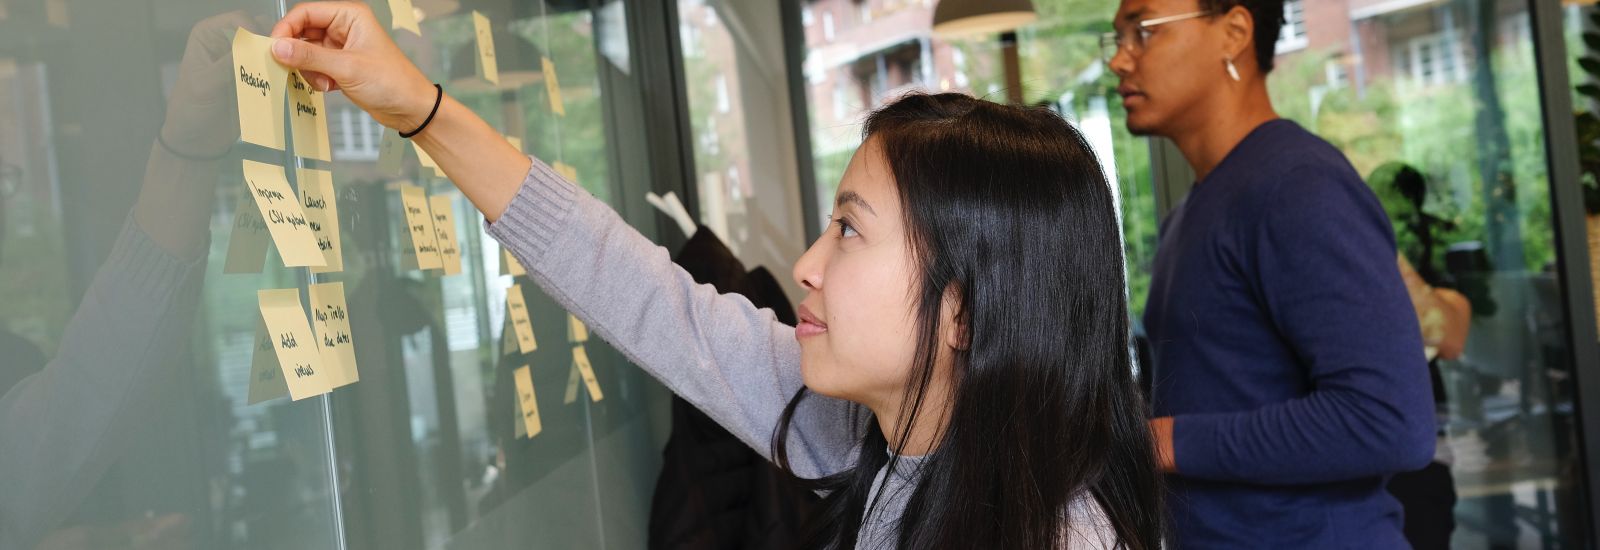 Two young researchers, representing different genders and ethnicities, map out a plan using post-it notes on a whiteboard